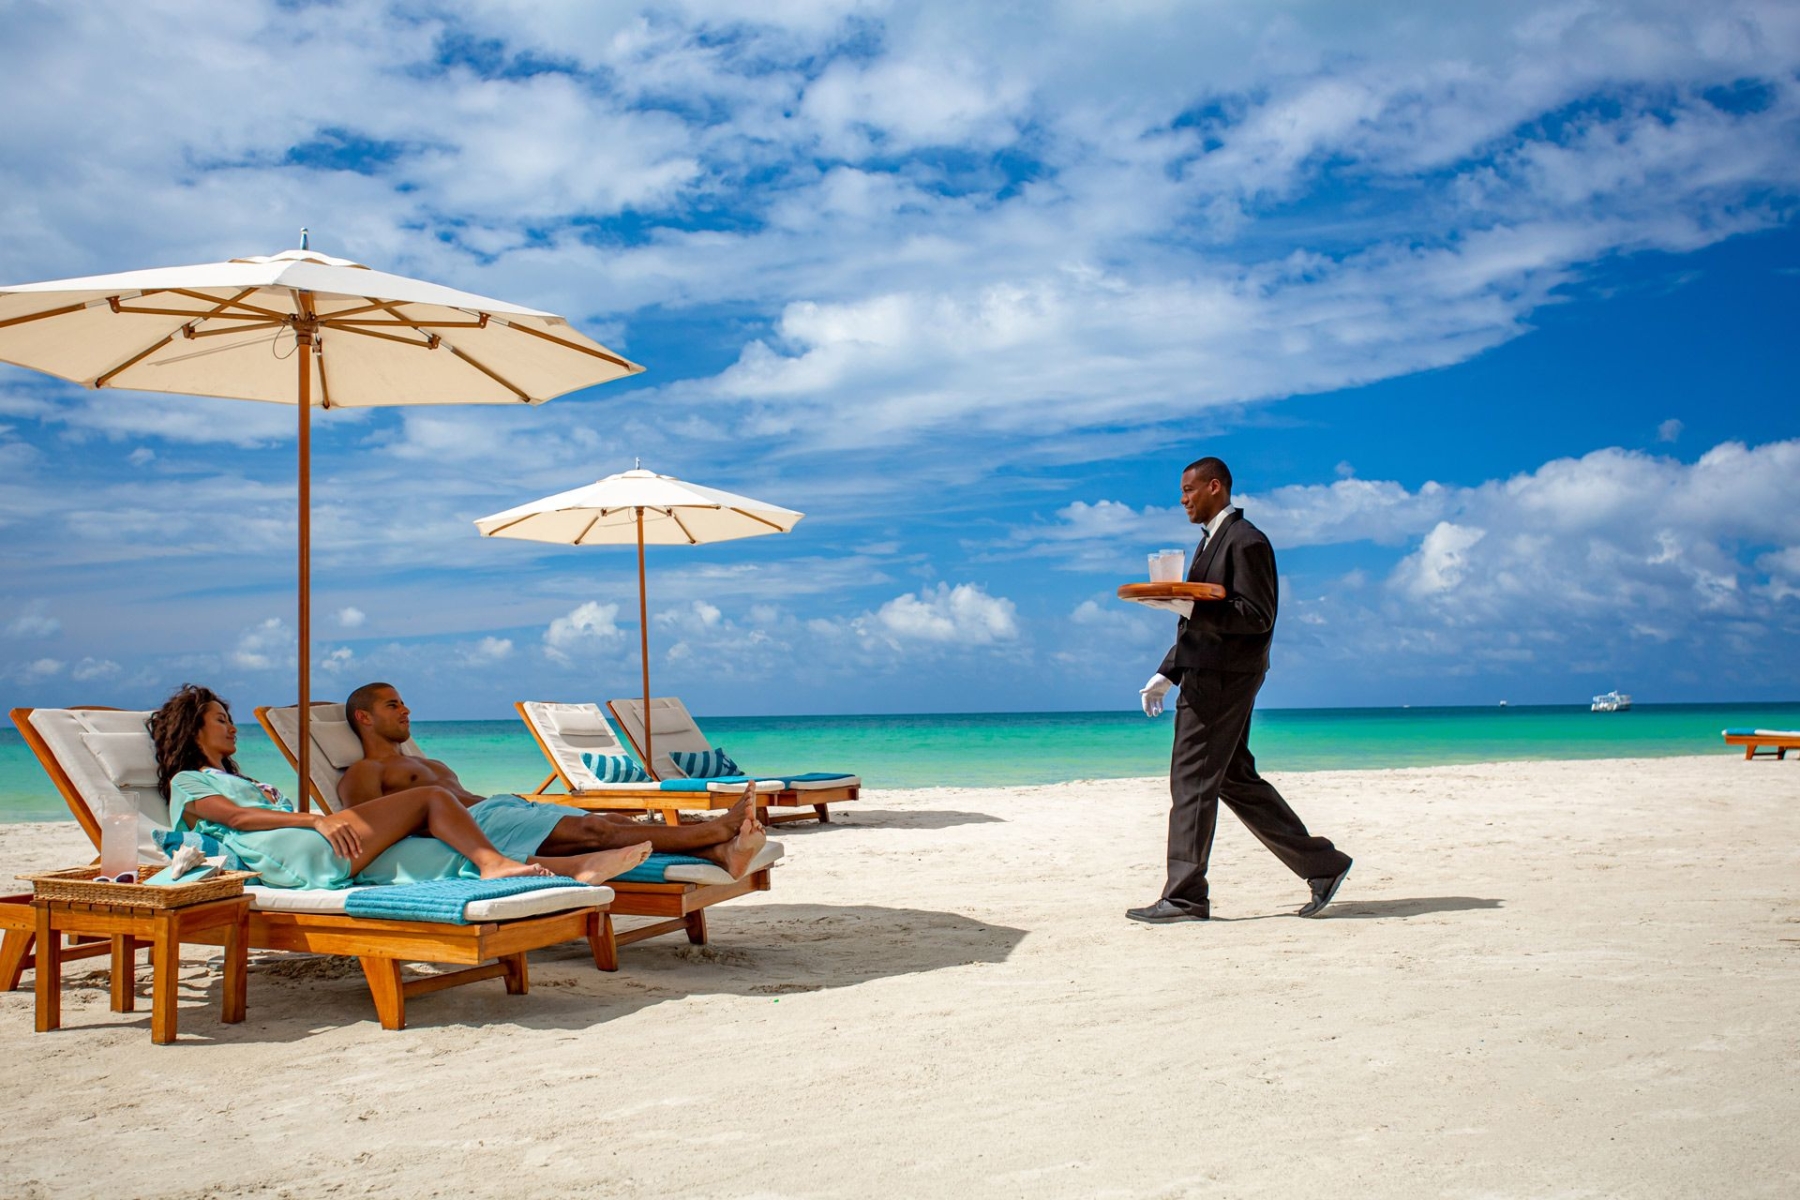 Should I Upgrade to Butler Service for My Honeymoon at Sandals | 2 Travel Anywhere